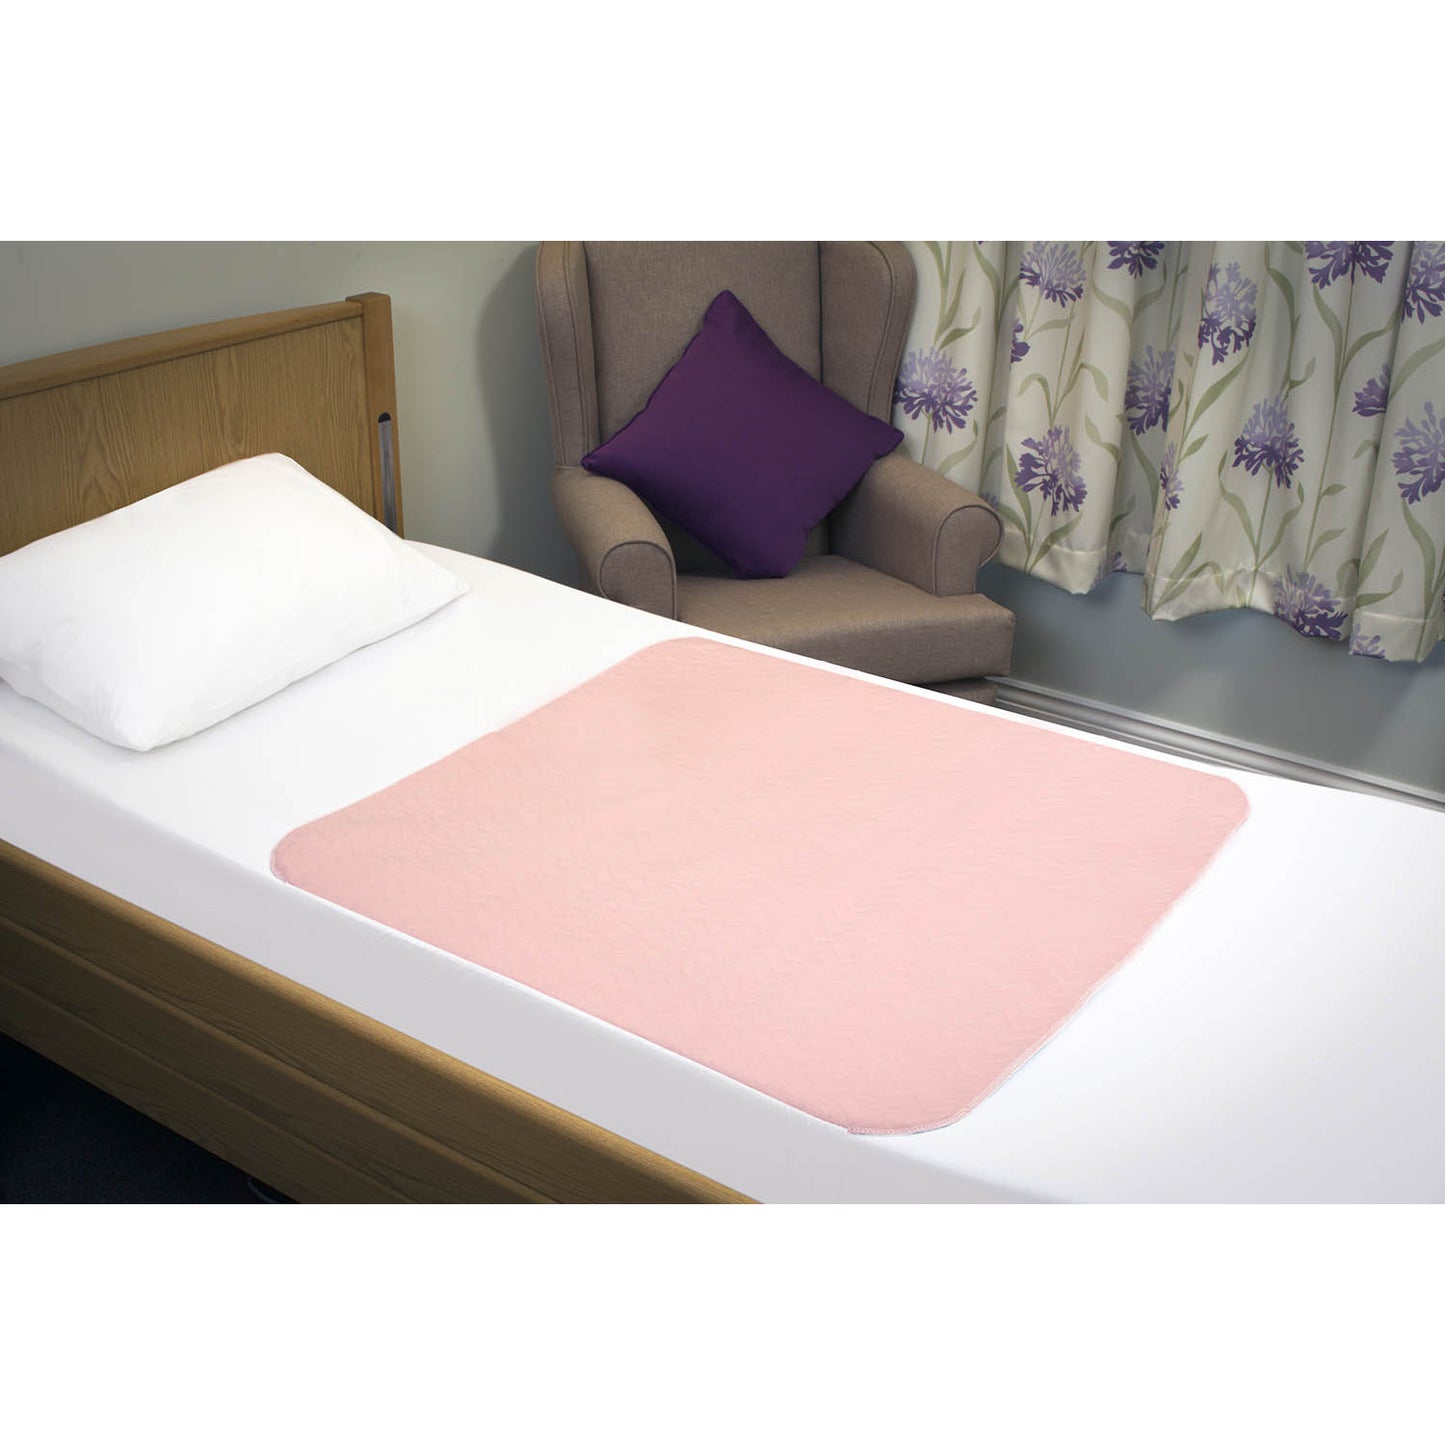 Sonoma Bedpad With Tucks - 85x115cm - 3.5ltr Absorbency